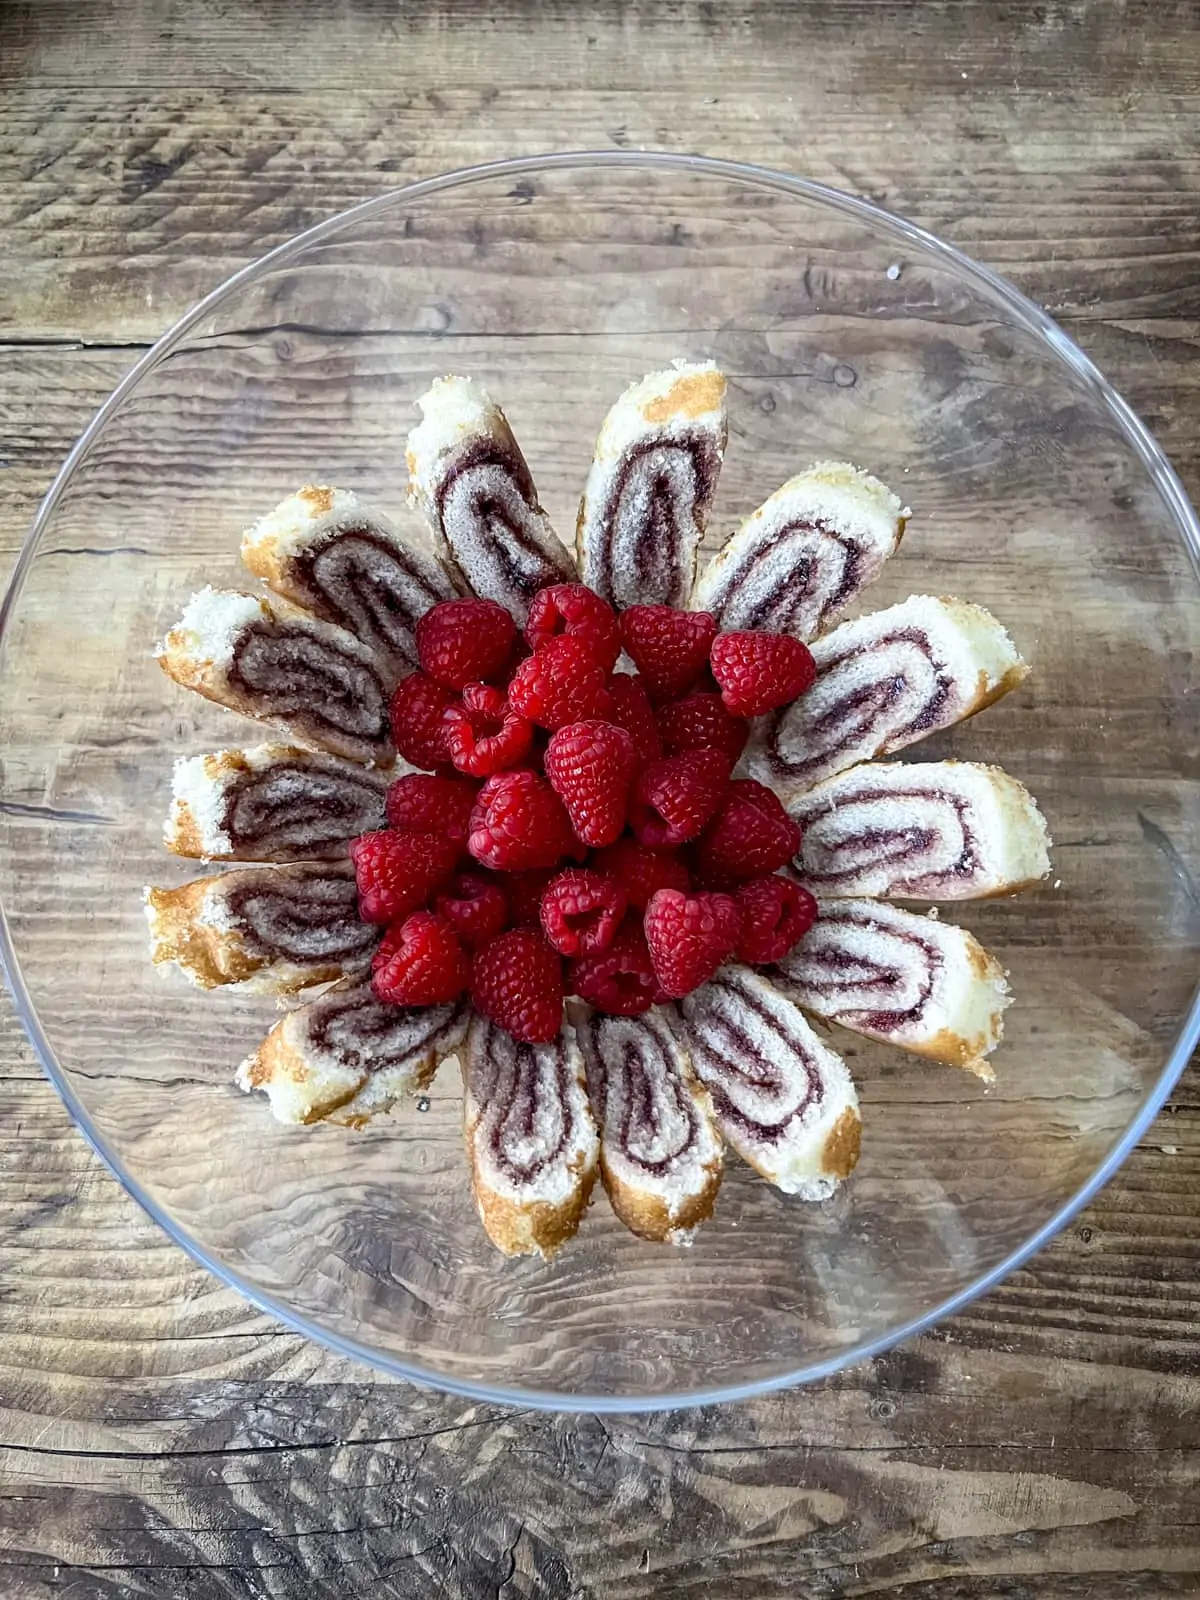 Overhead shot of glass trifle bowl with slices of jam swiss roll and fresh raspberries in. The bowl is on a wooden table.